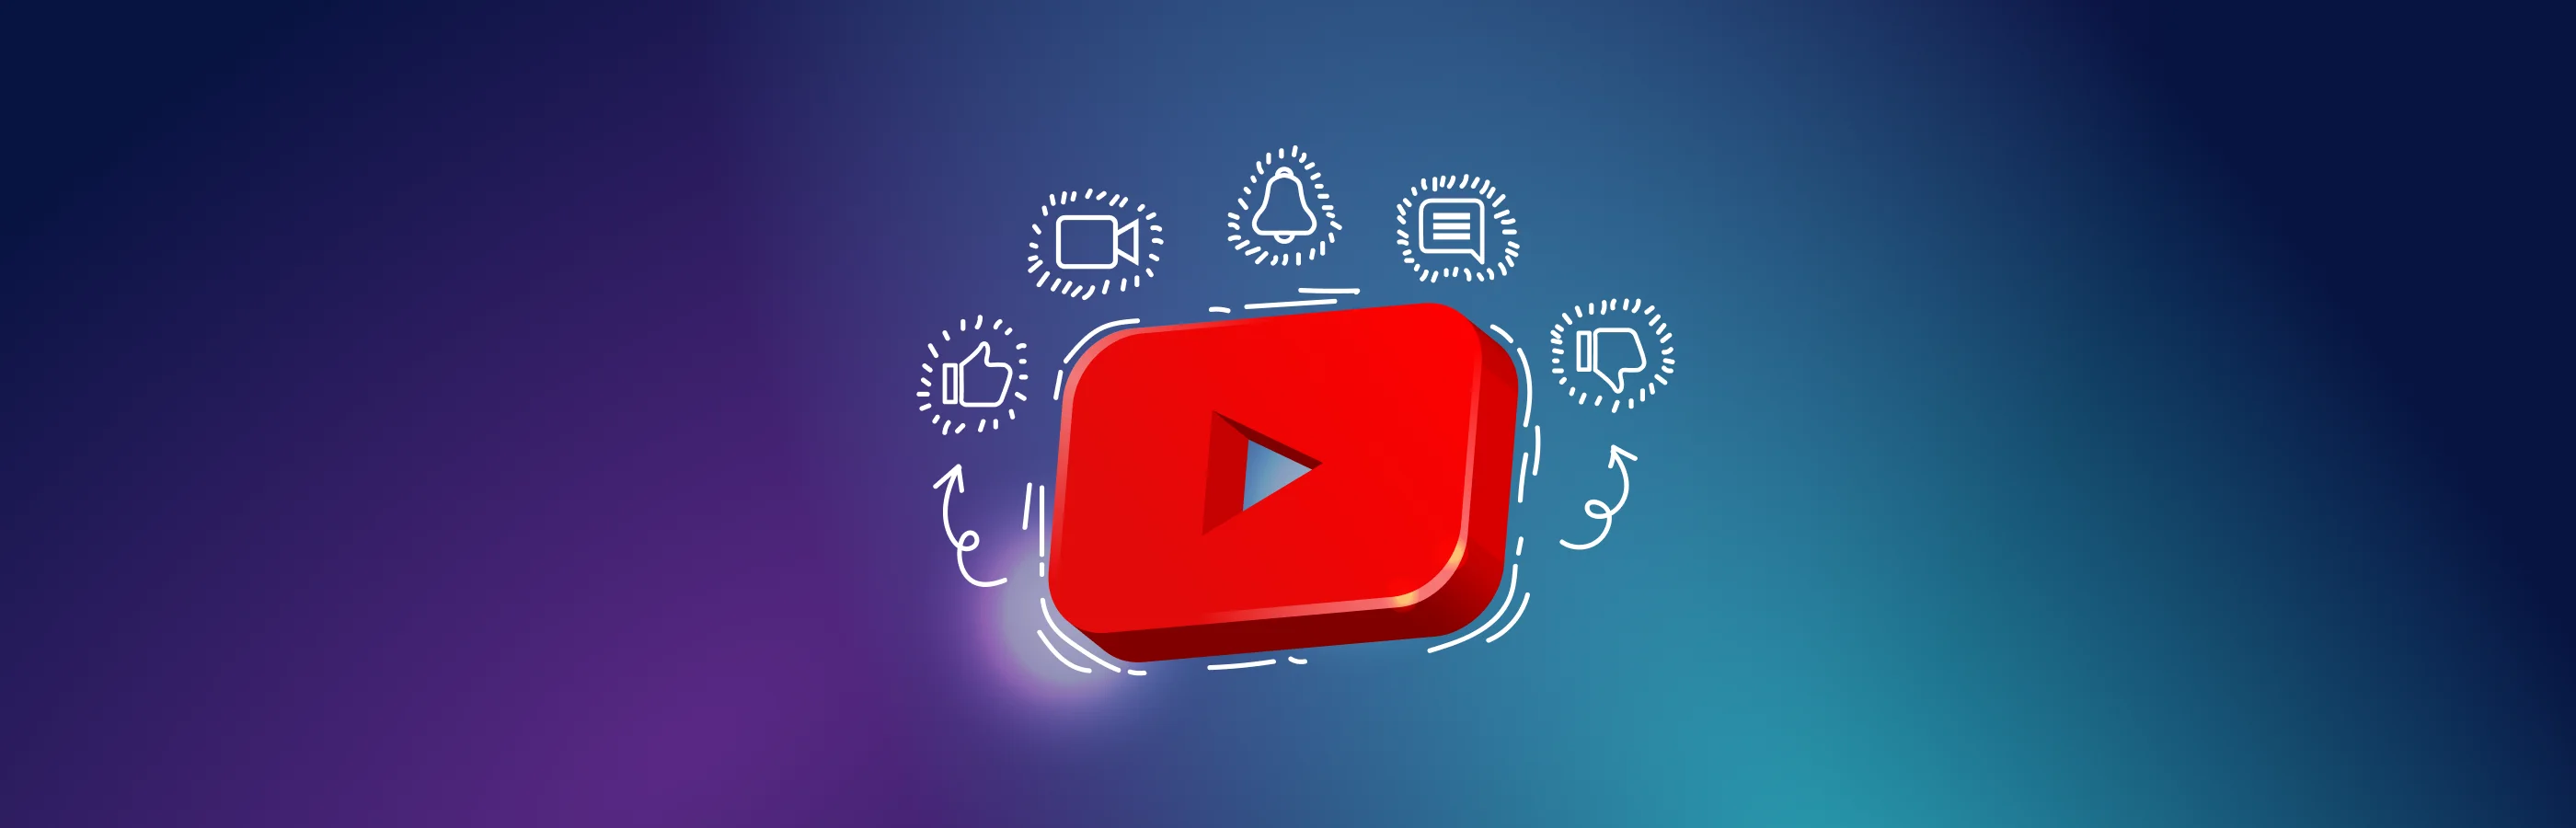 SEO strategies for YouTube doorways: keyword selection and competitive analysis